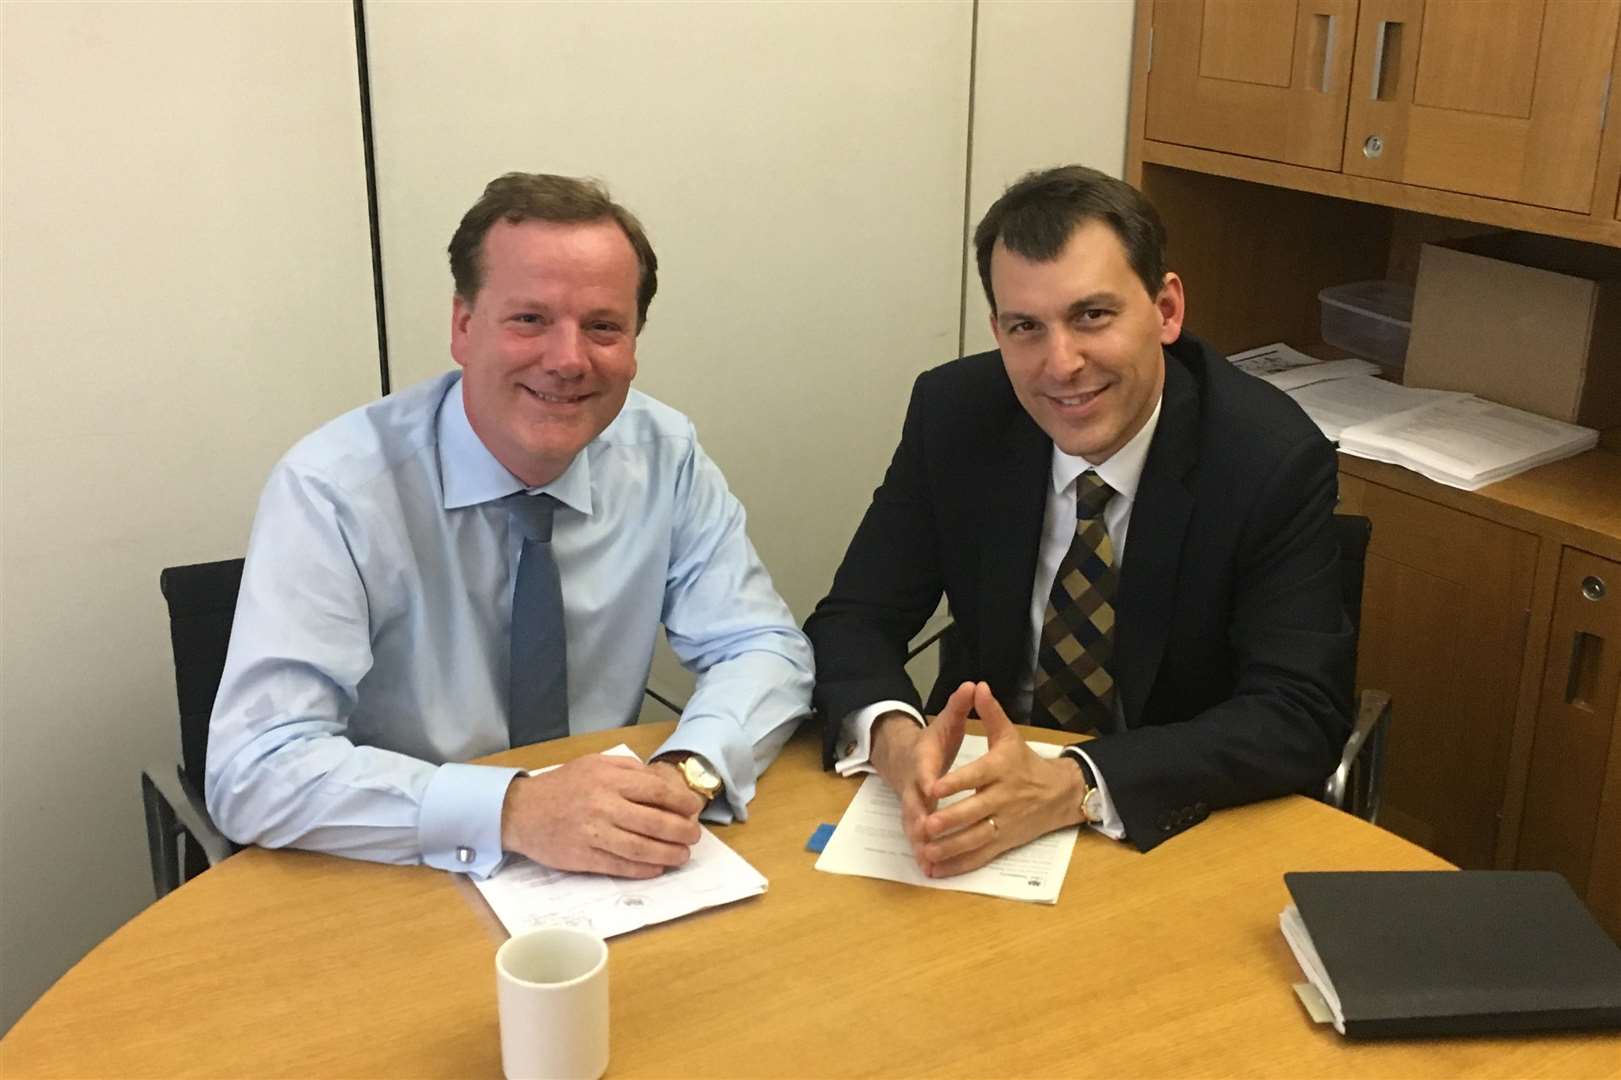 MP Charlie Elphicke with Treasury minister John Glen. Picture: Office of Charlie Elphicke.